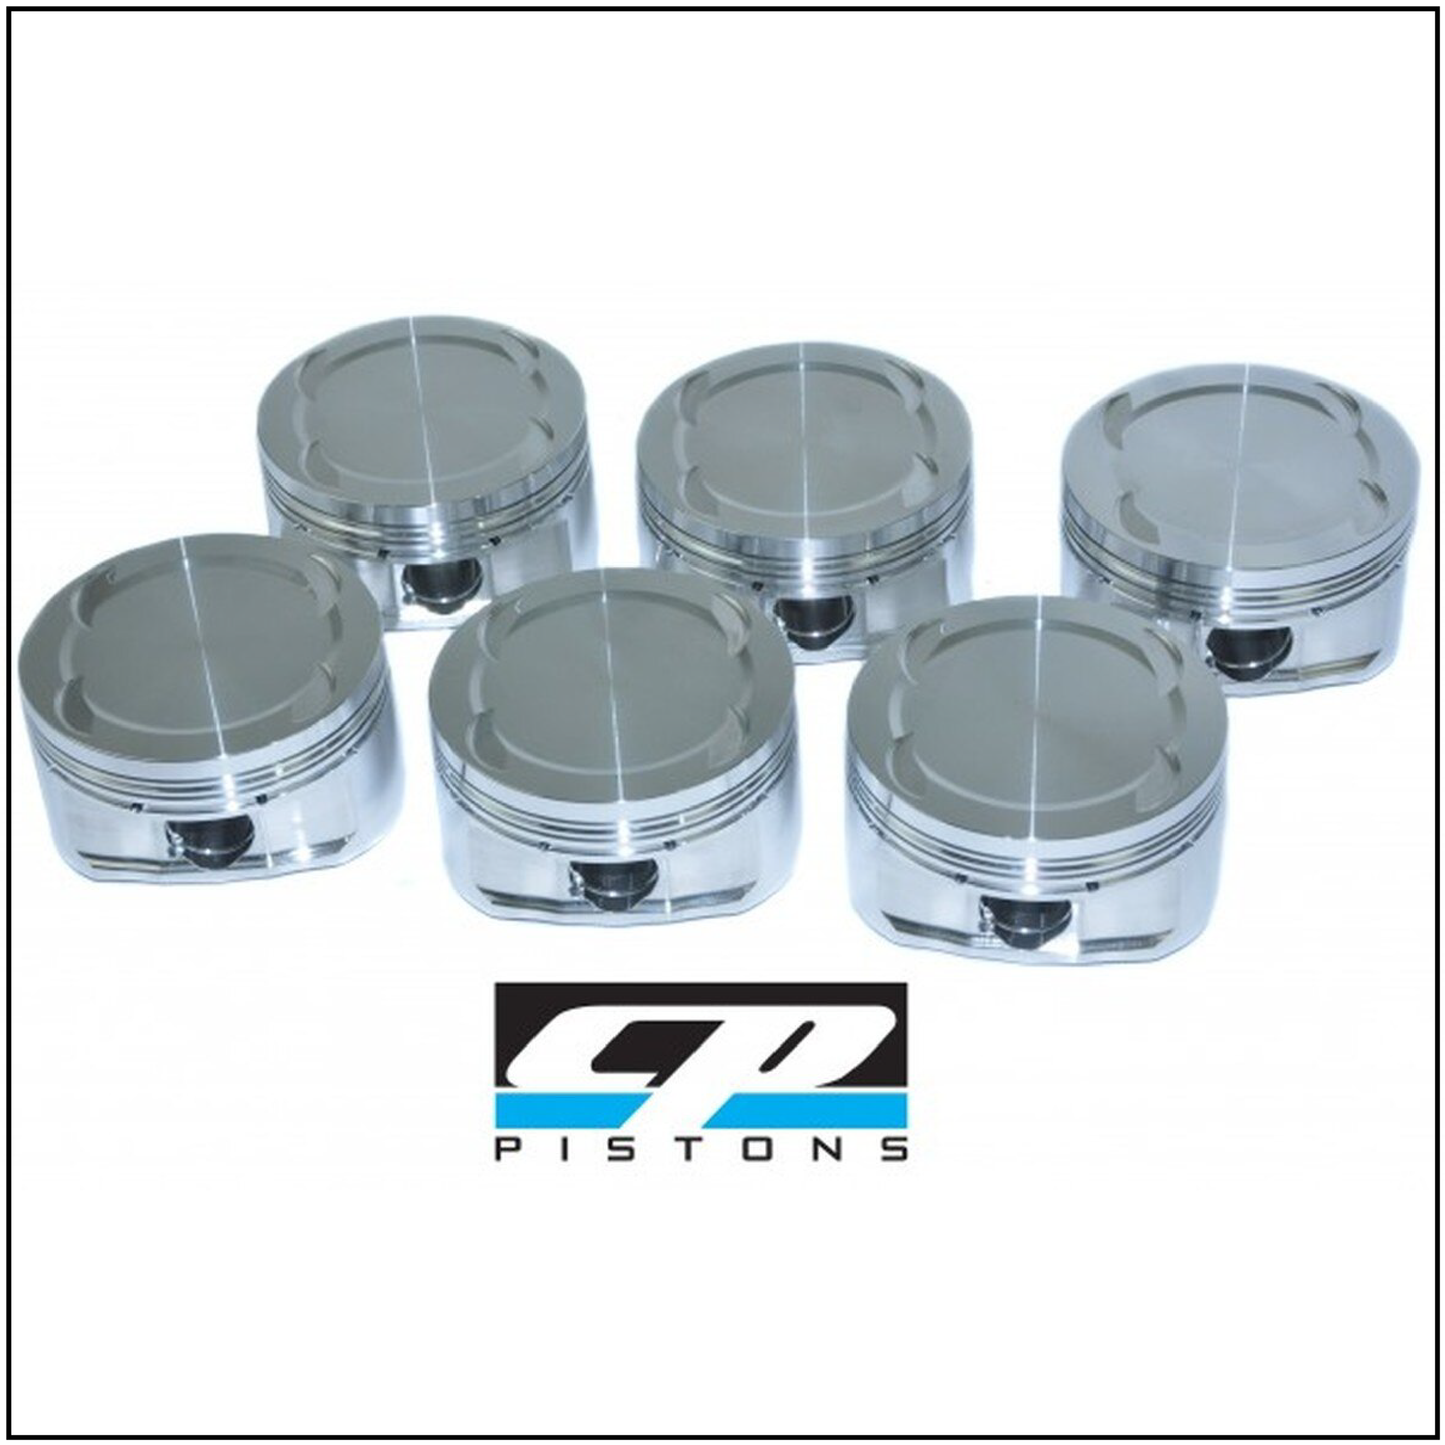 CP-Carrillo Pistons (CR 8.5) for 2JZGTE Toyota Engines